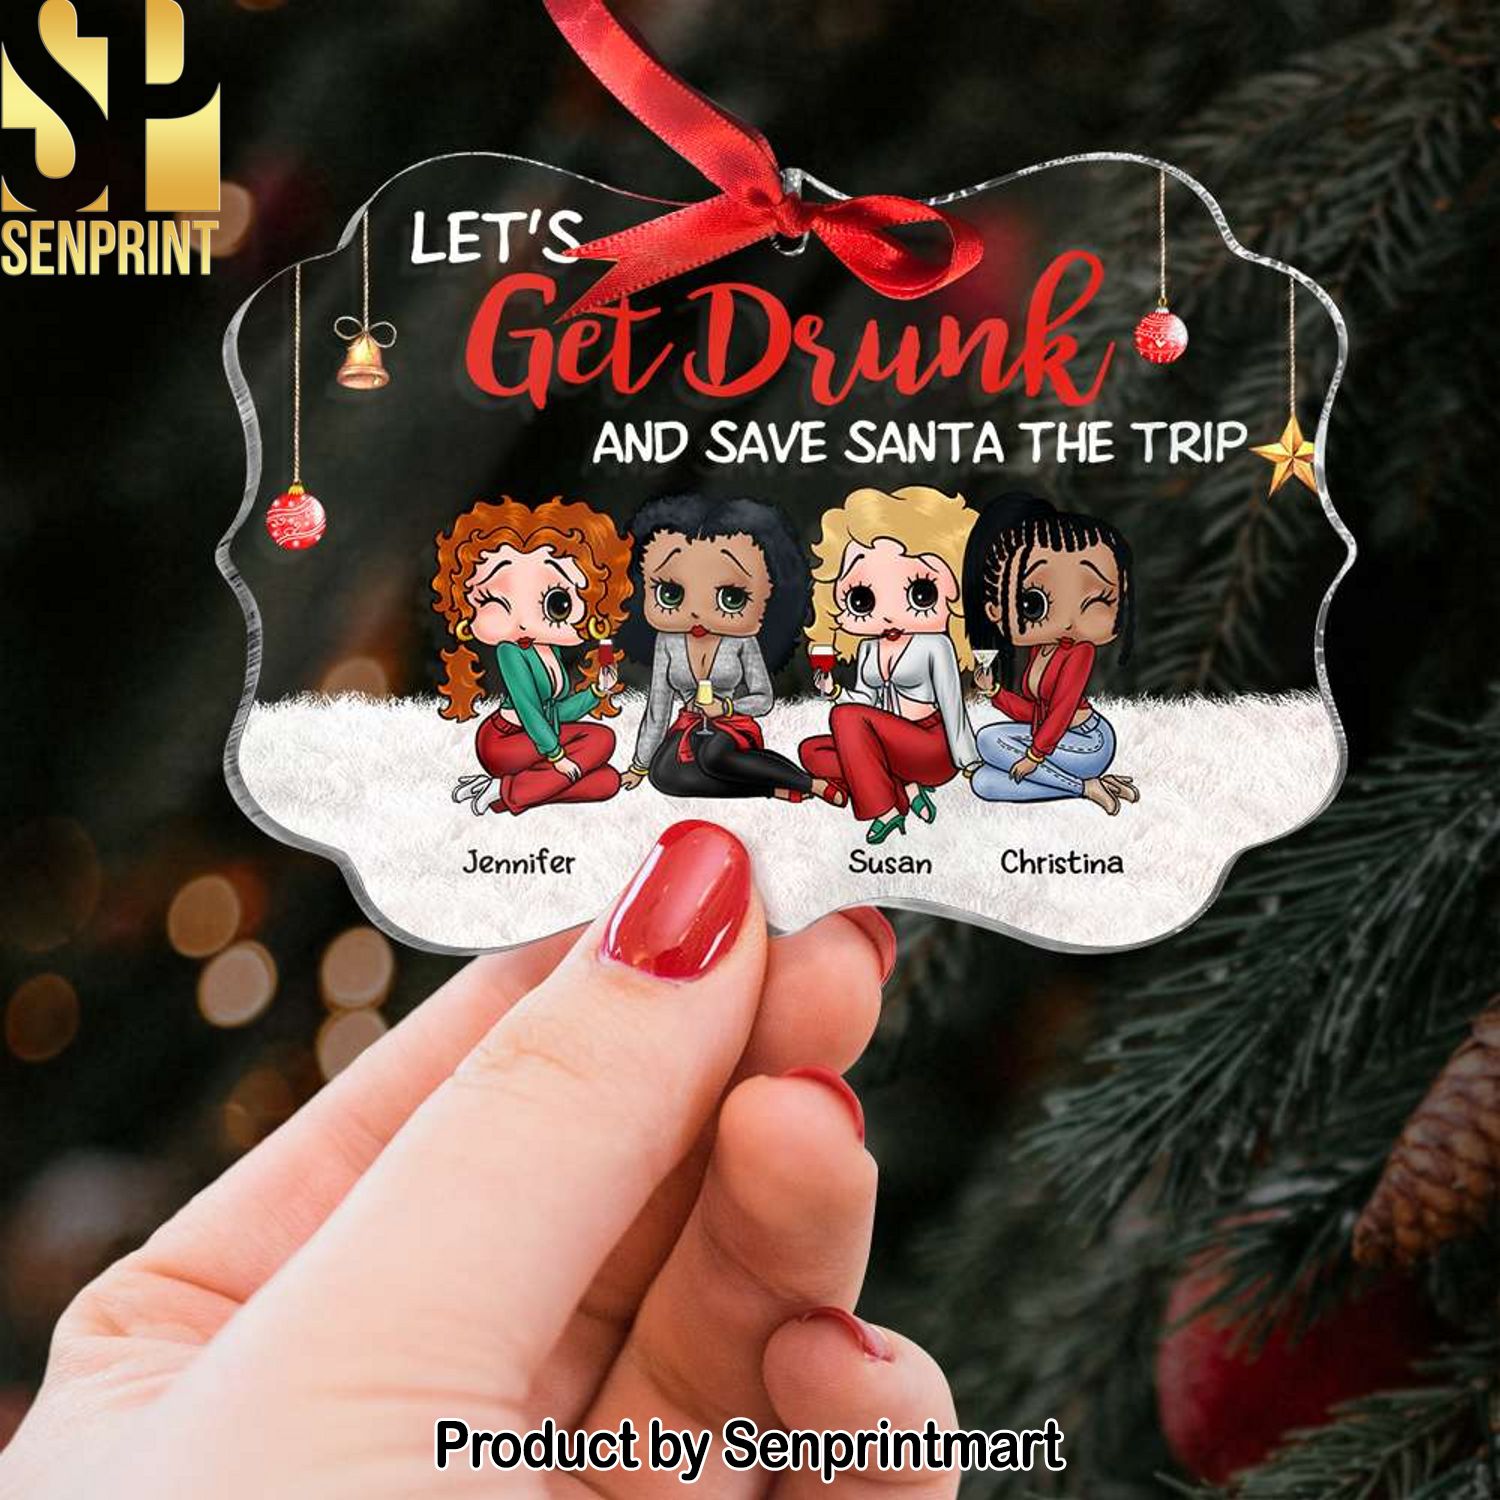 Let’s Get Drunk, Gift For Friends, Personalized Acrylic Ornament, Drinking Friends Ornament, Gift Ideas